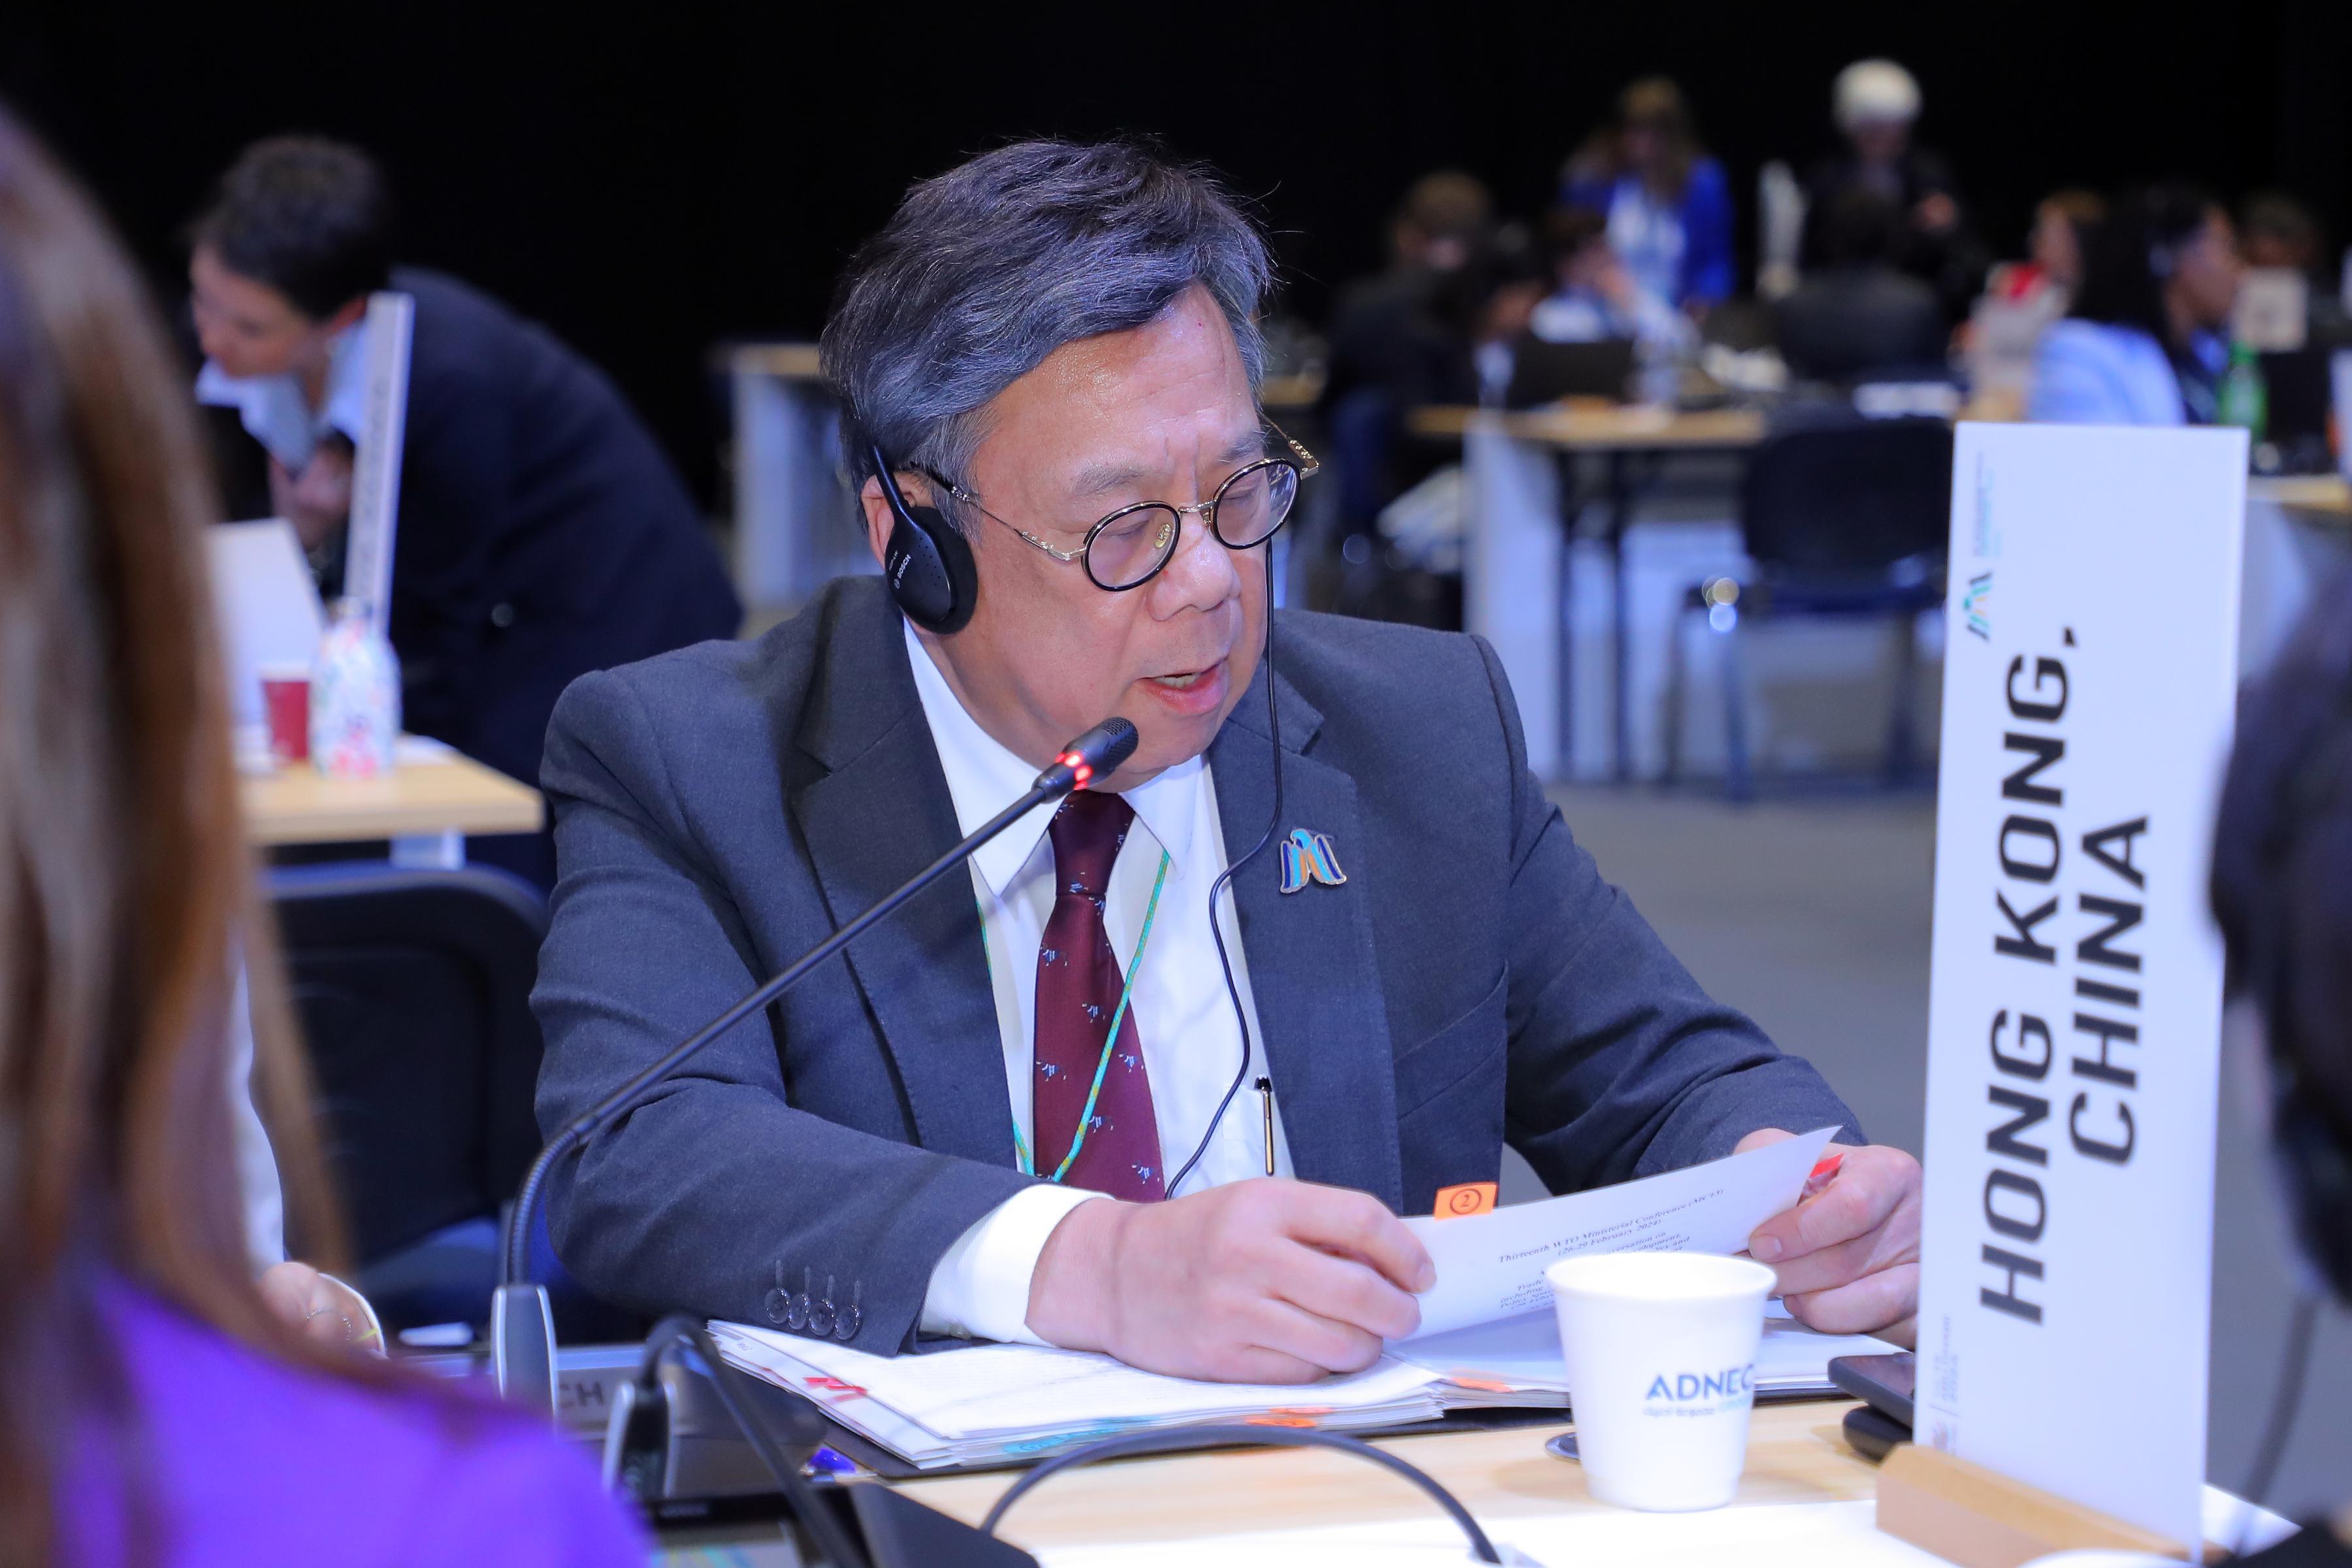 The Secretary for Commerce and Economic Development, Mr Algernon Yau, speaks at a plenary session on trade and sustainable development during the 13th World Trade Organization Ministerial Conference in Abu Dhabi, the United Arab Emirates, on February 26 (Abu Dhabi time).